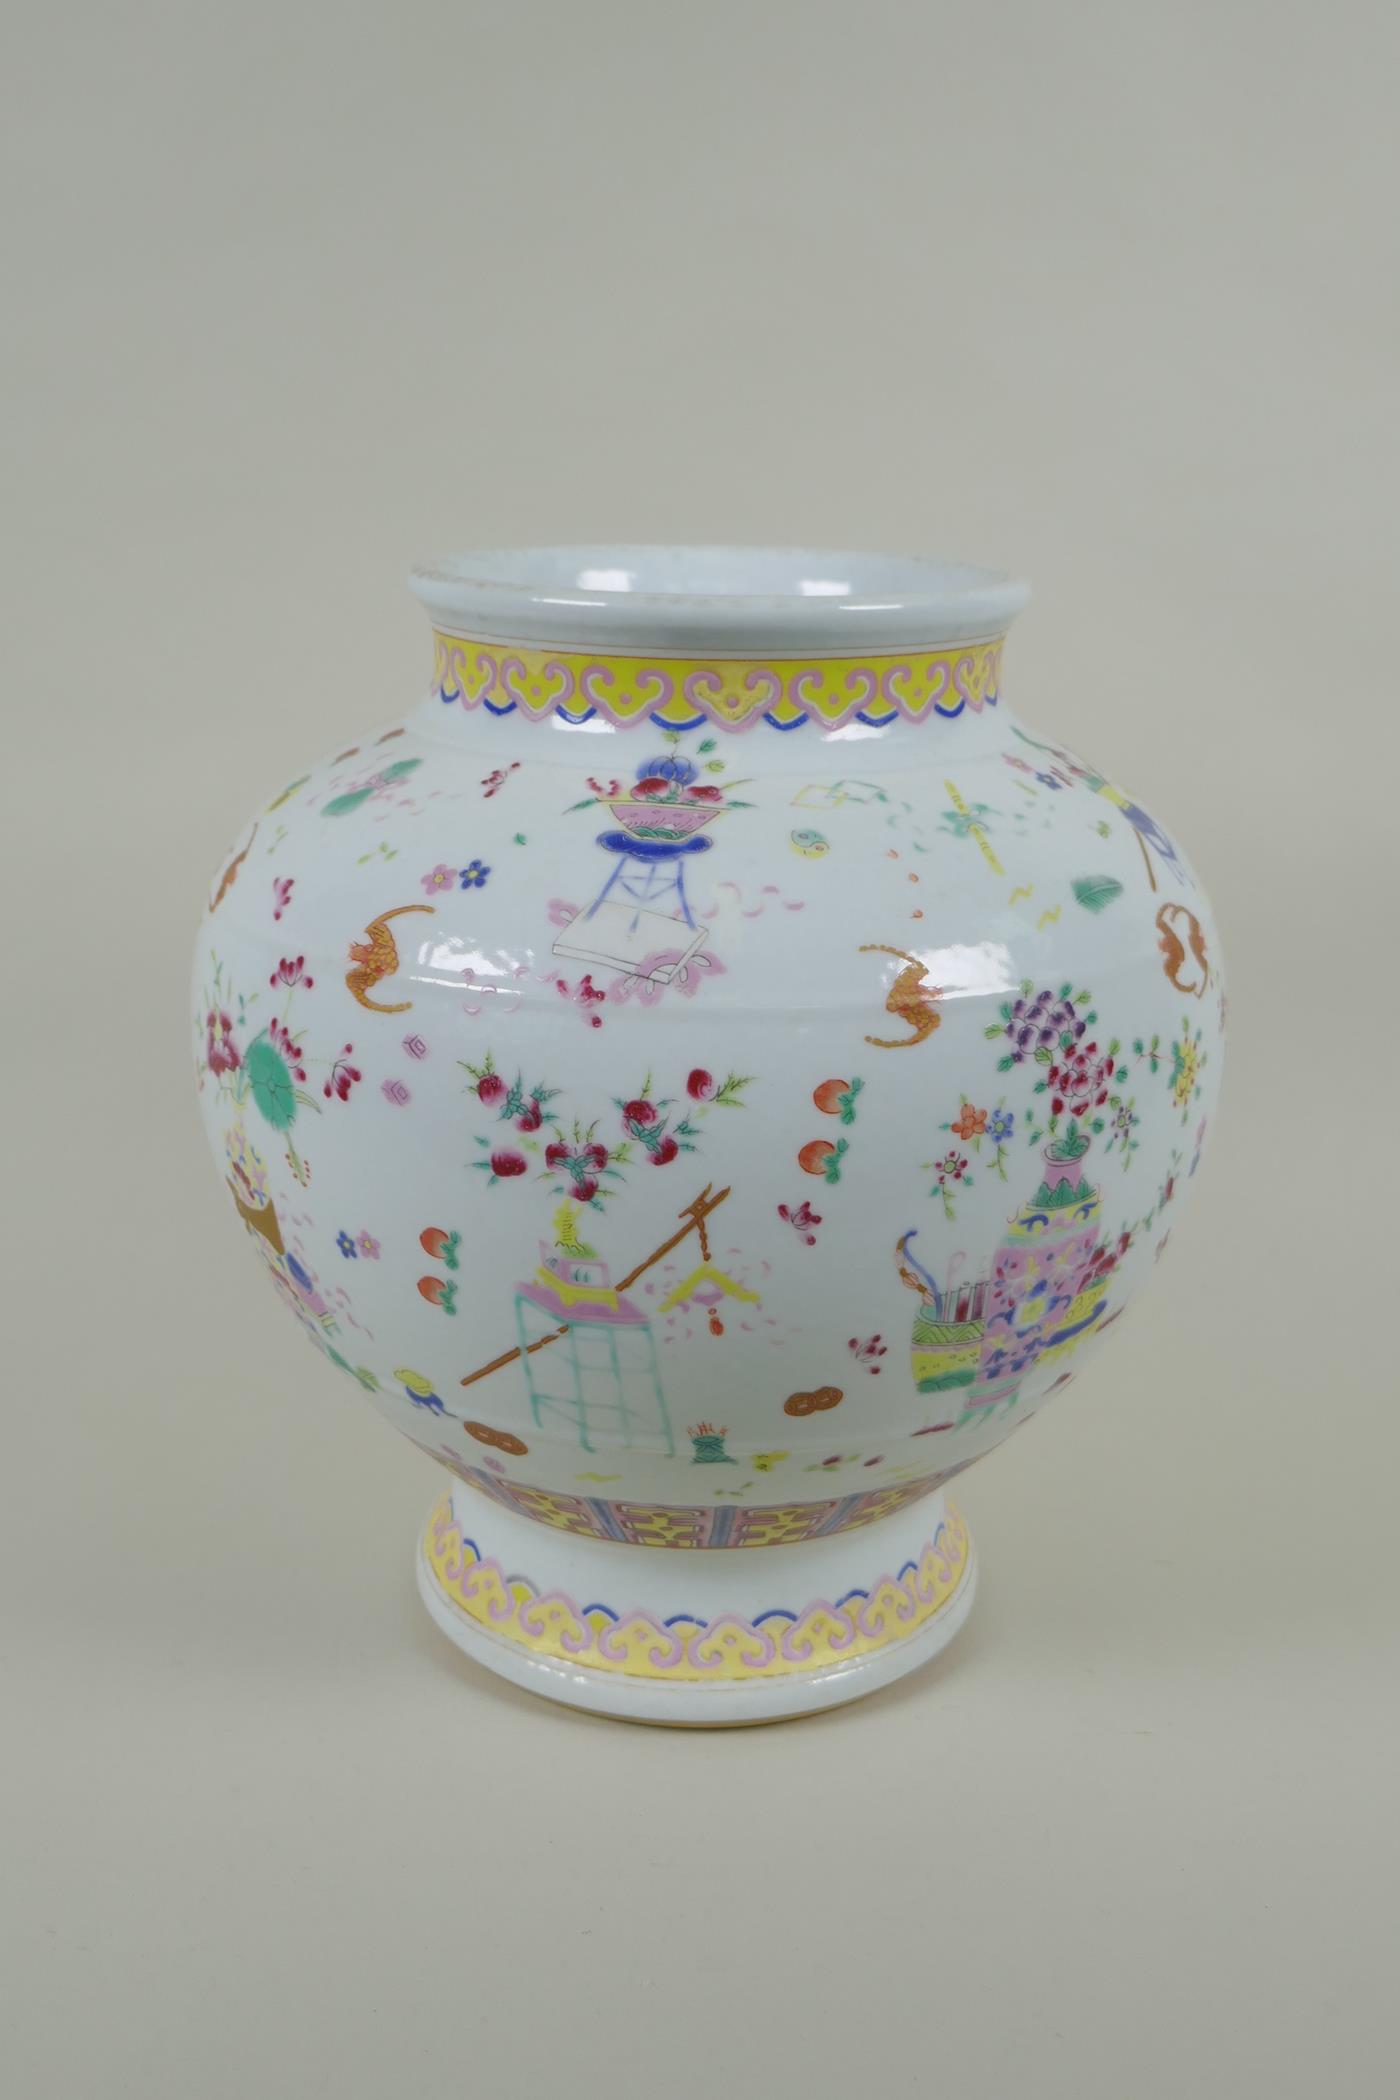 A Chinese polychrome porcelain vase decorated with bats and vases of flowers, GuangXu 6 character - Image 4 of 5